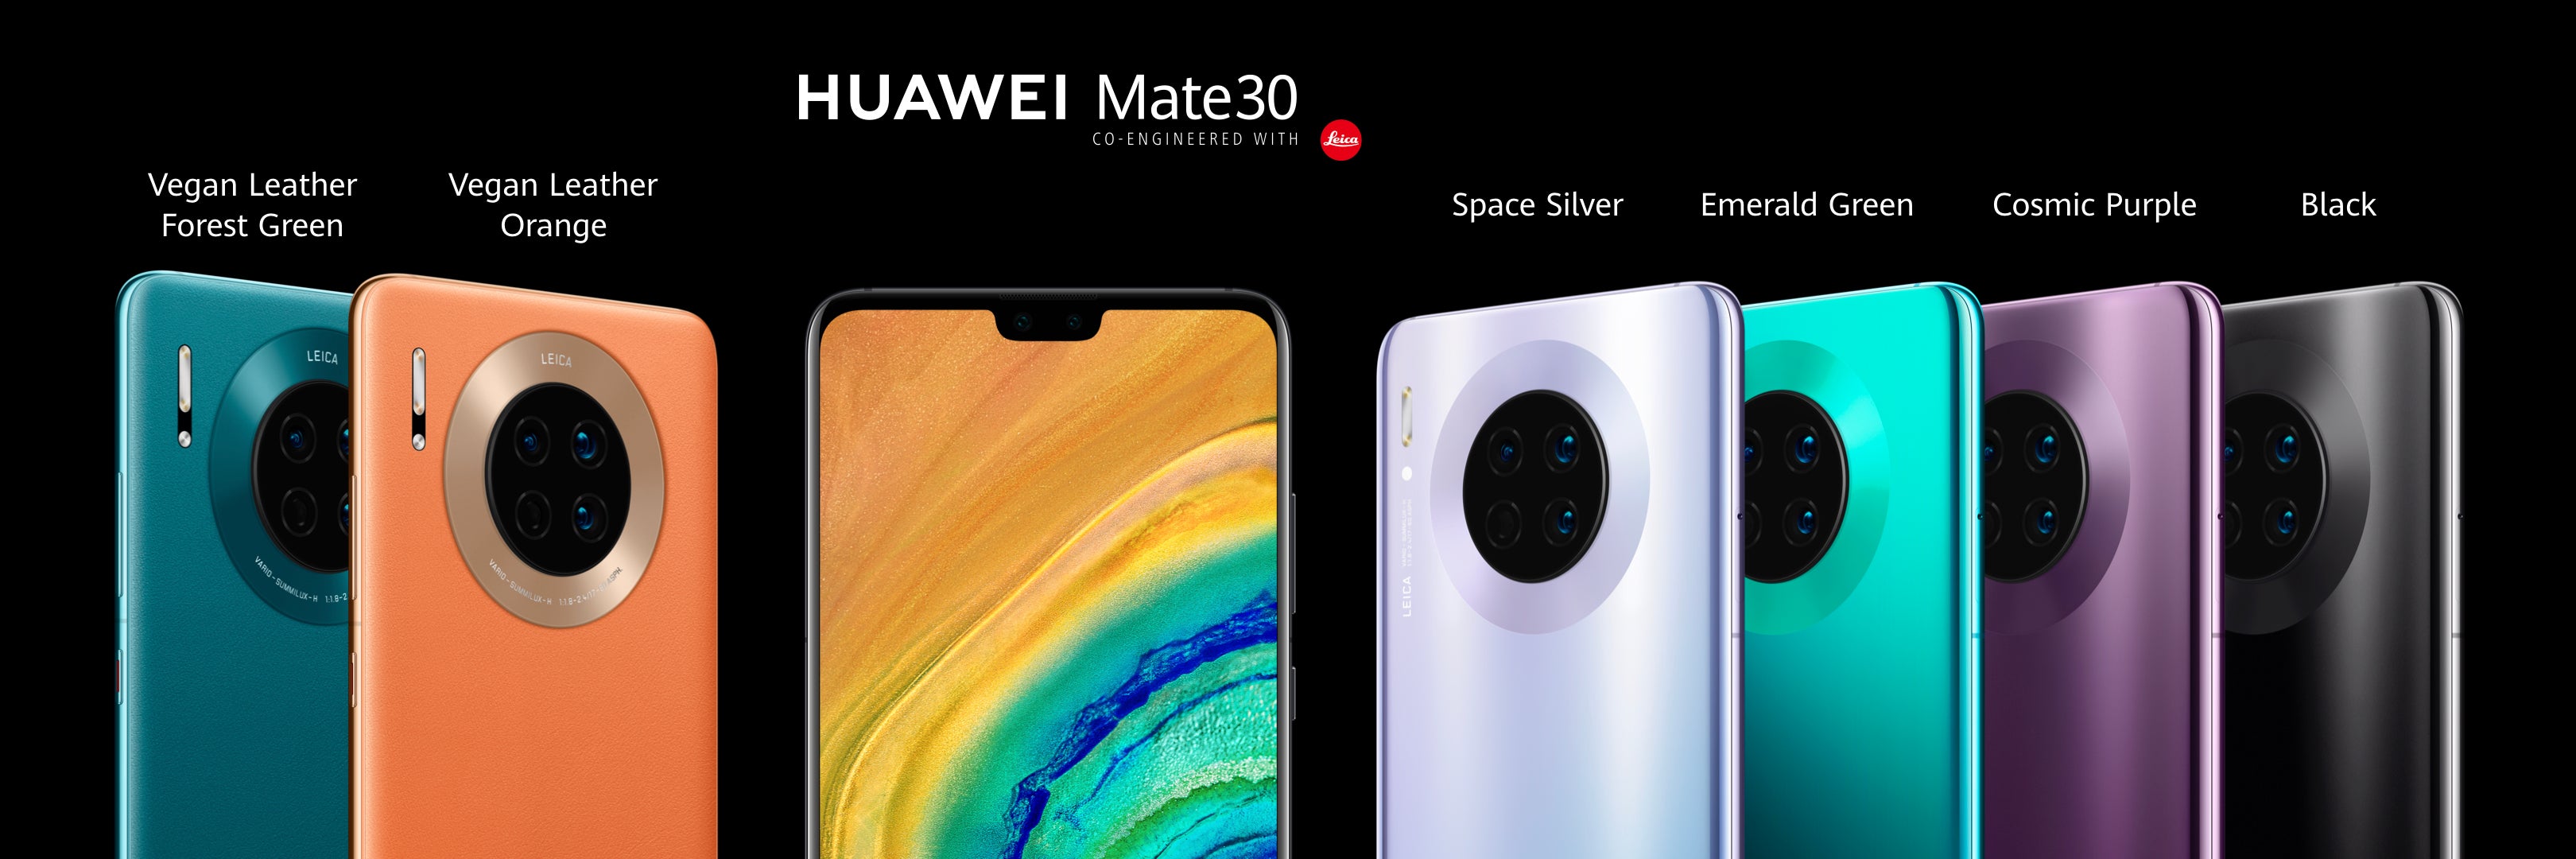 Mate 30 is the best 30: flat screen, giant battery, excellent camera kit